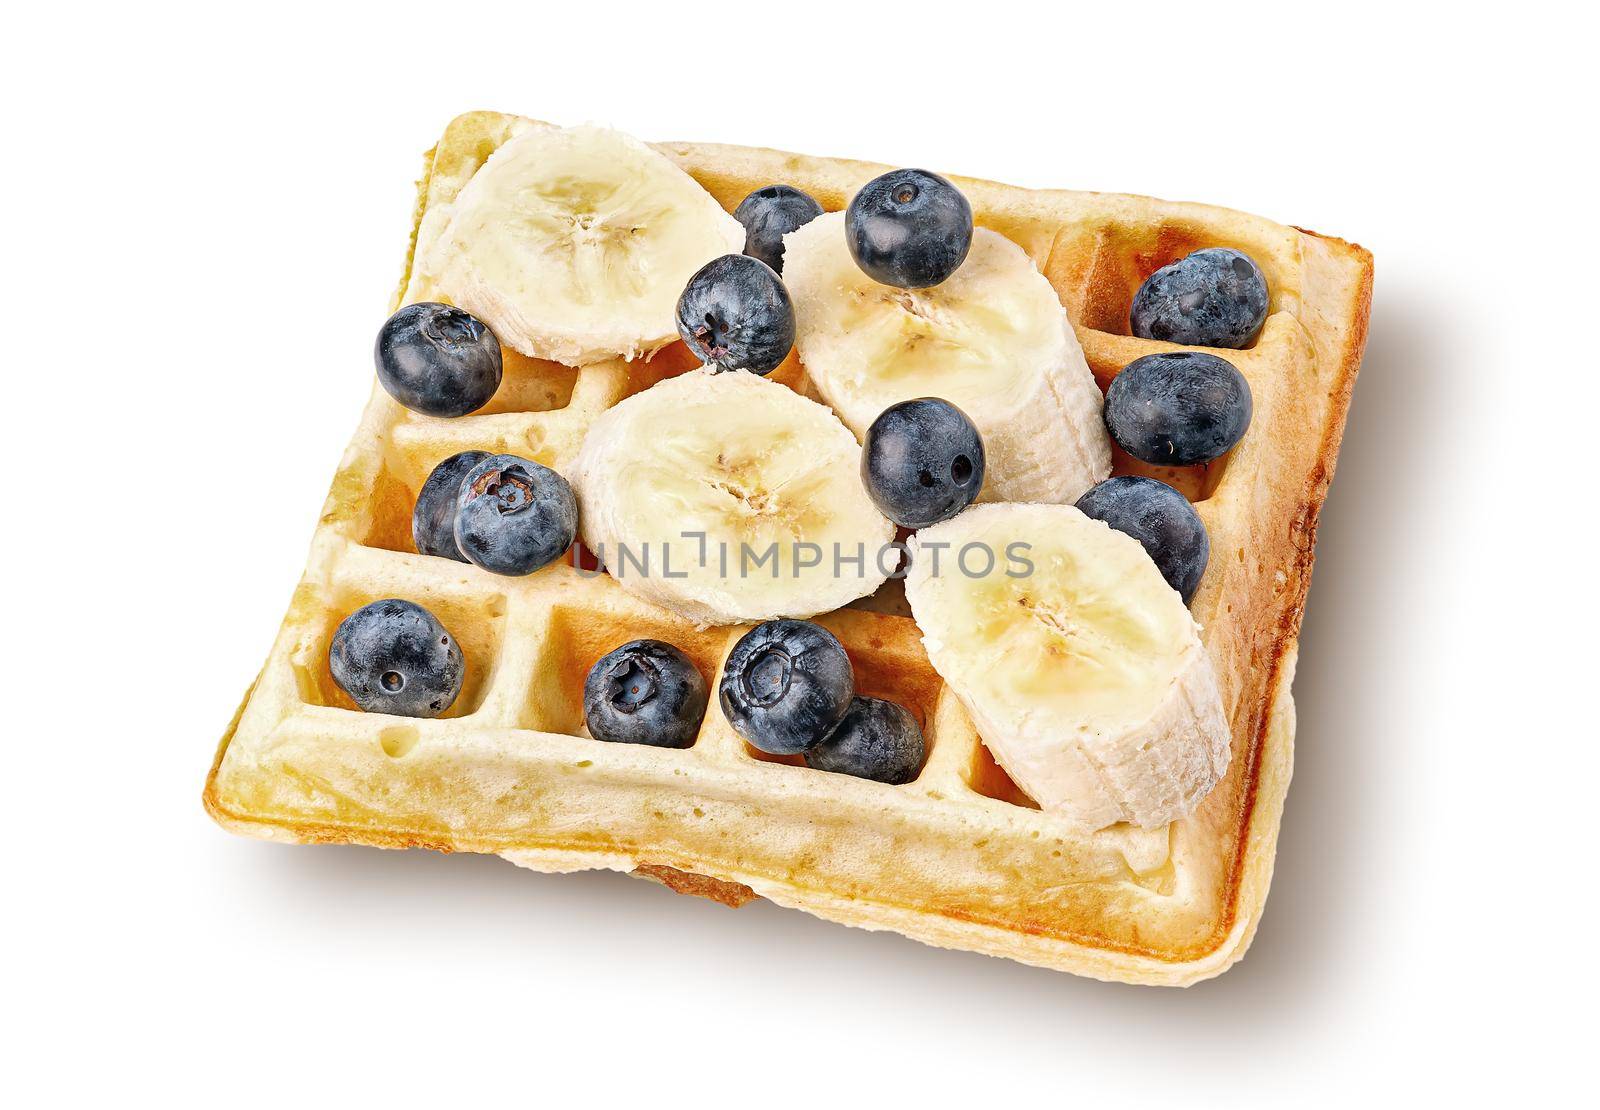 French waffles with blueberries and bananas top wiev isolated on white background